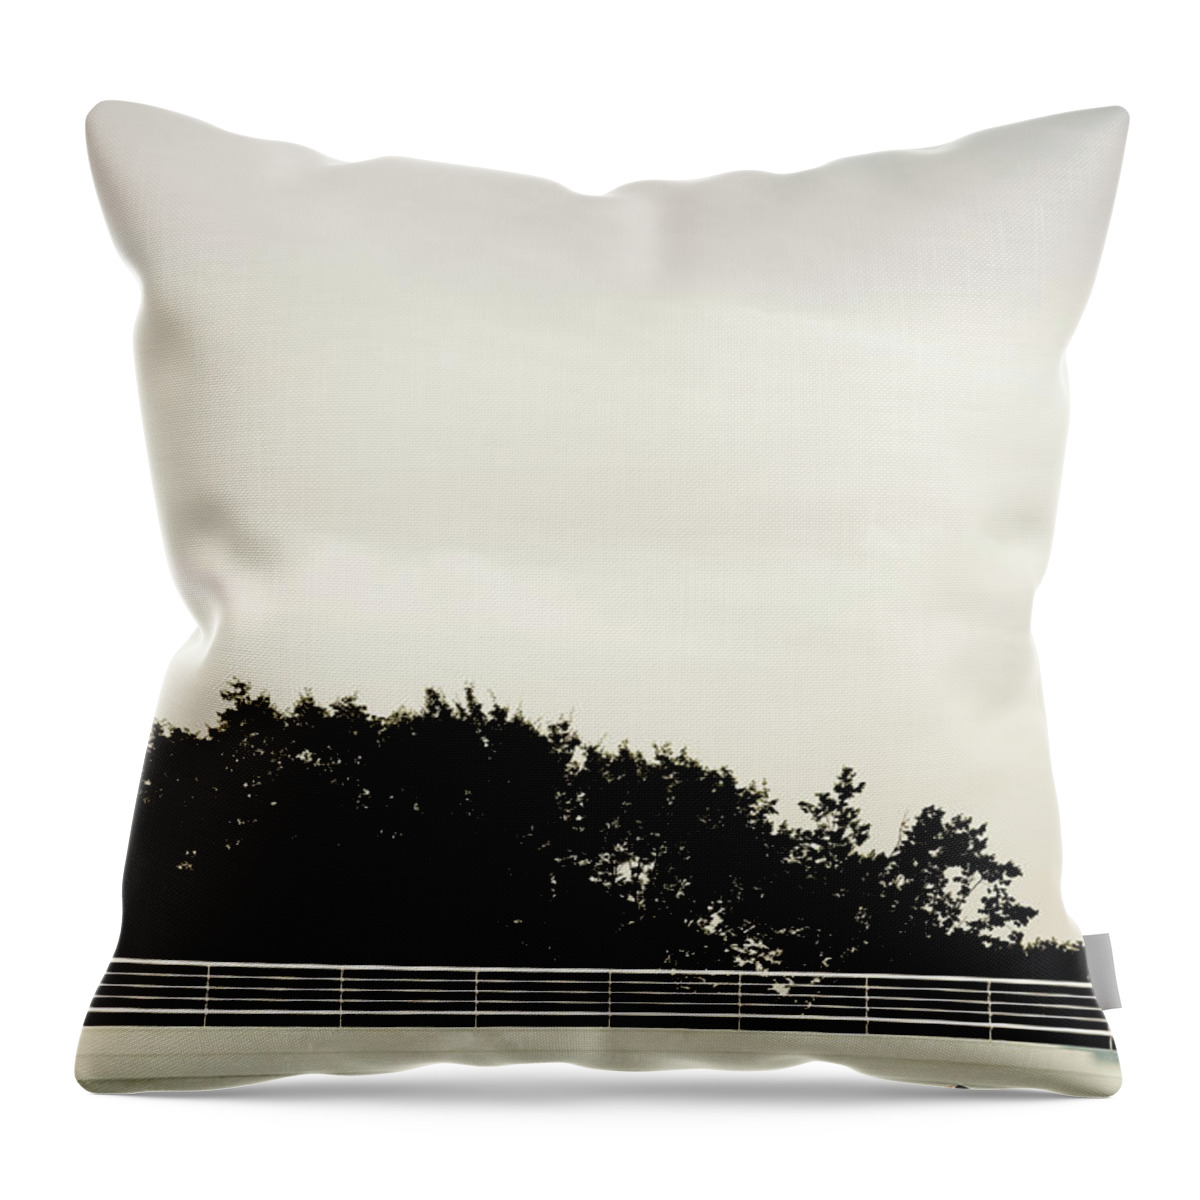 People Throw Pillow featuring the photograph Sleeper In Metropolis by Mlenny